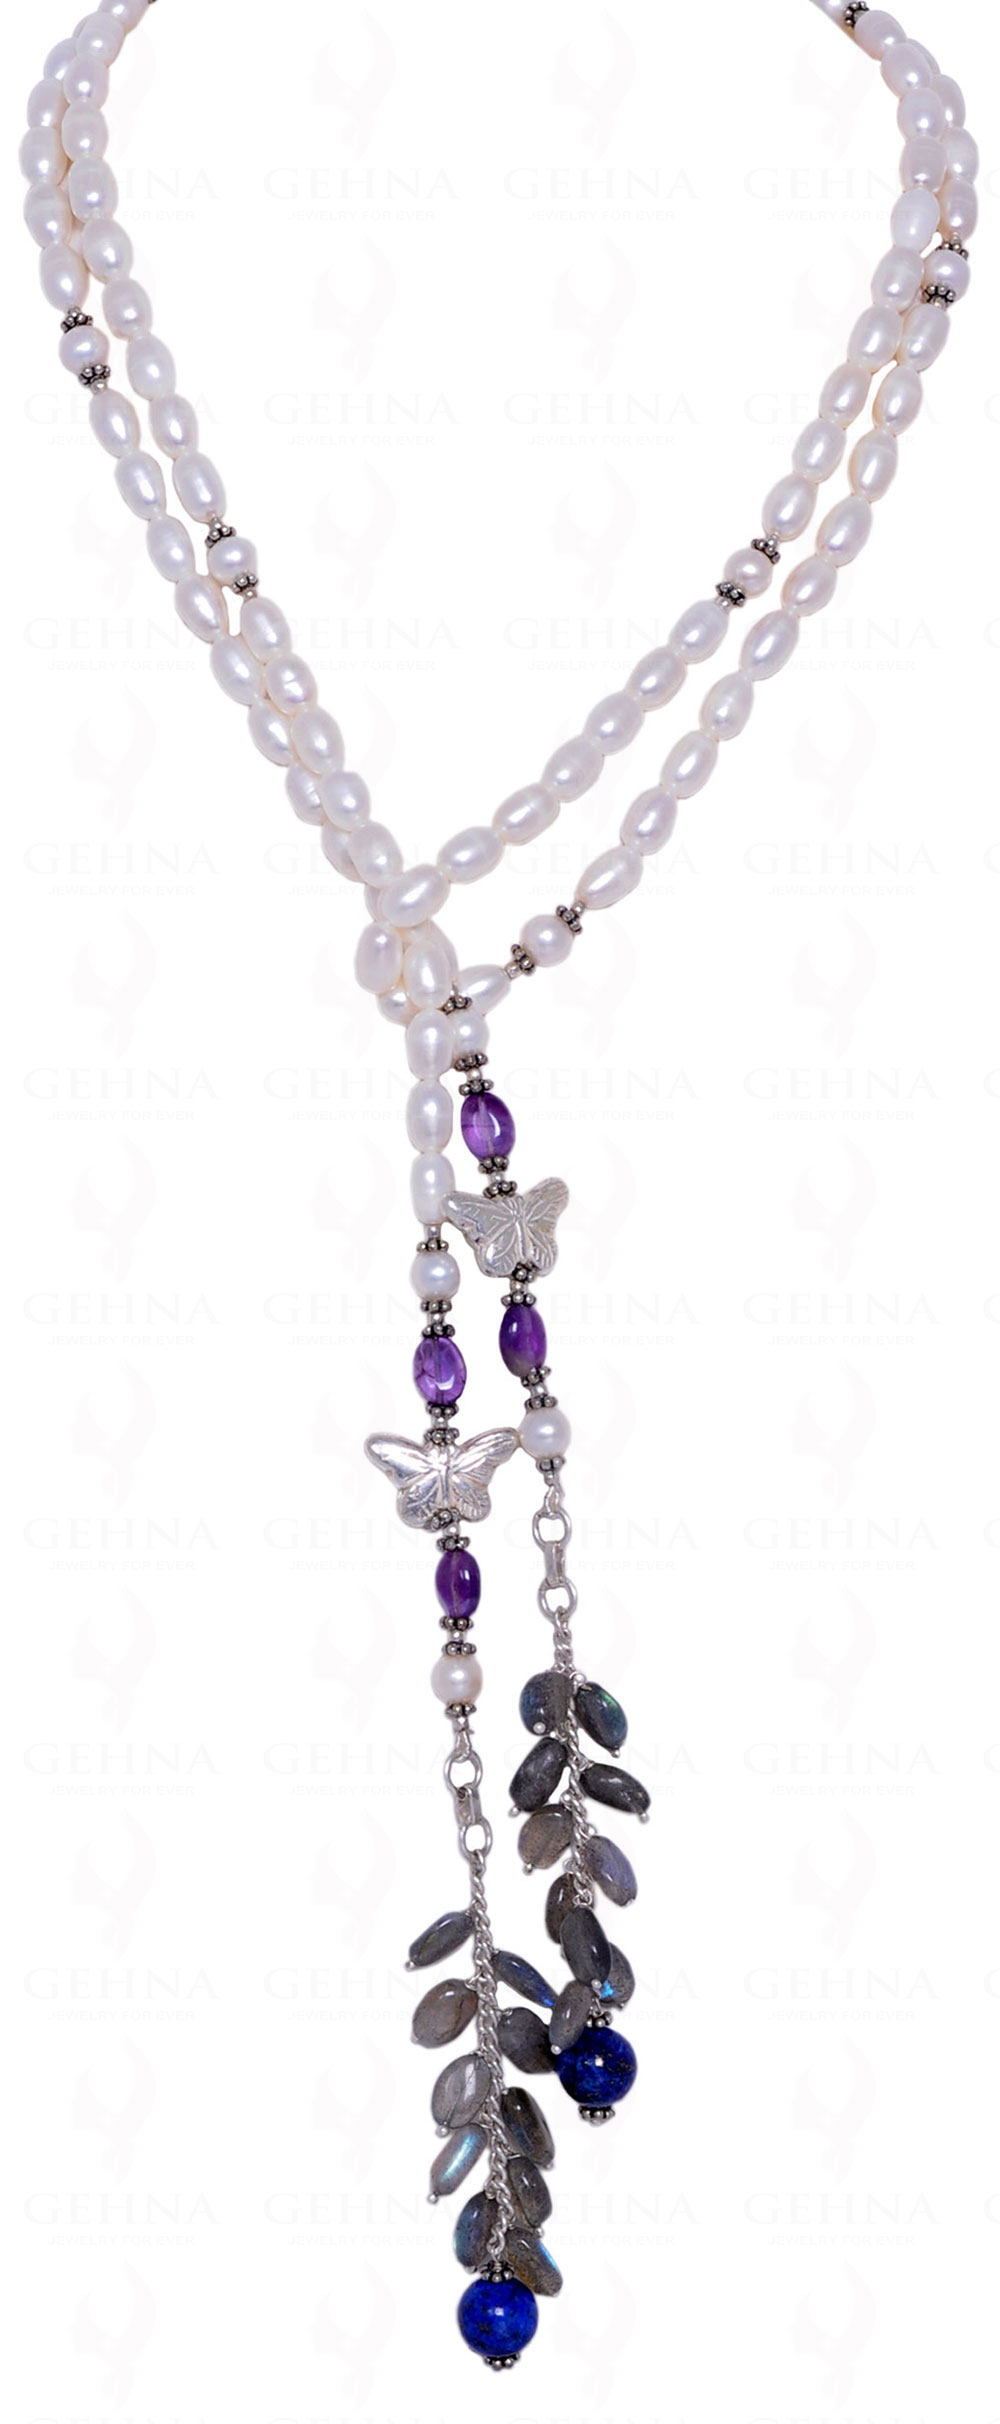 Pearls, Labradorite, Lapis & Amethyst Bead 52" Inches Long Necklace NM-1039